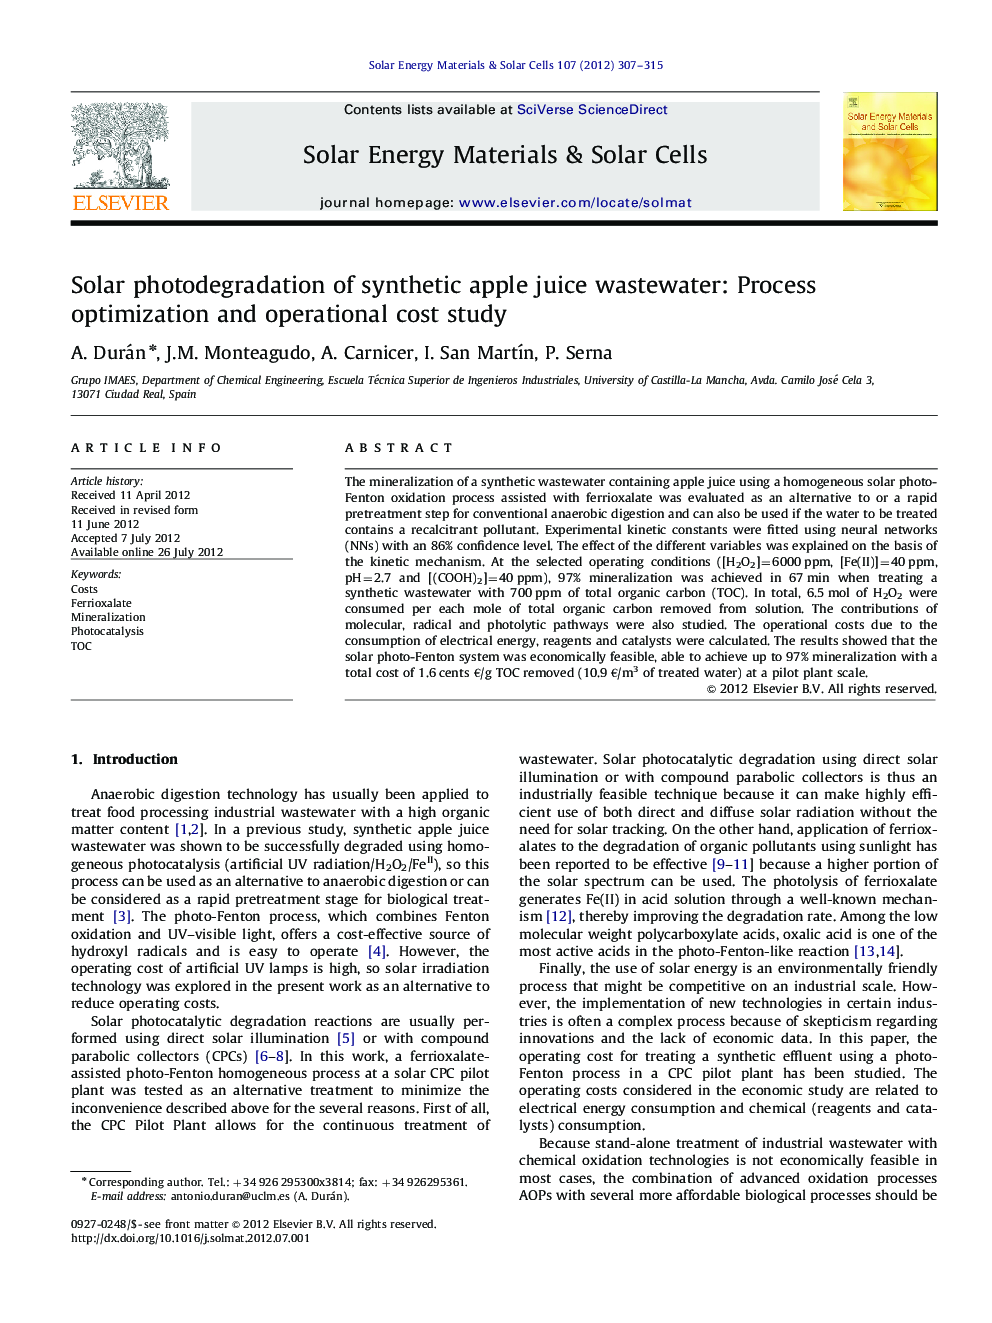 Solar photodegradation of synthetic apple juice wastewater: Process optimization and operational cost study